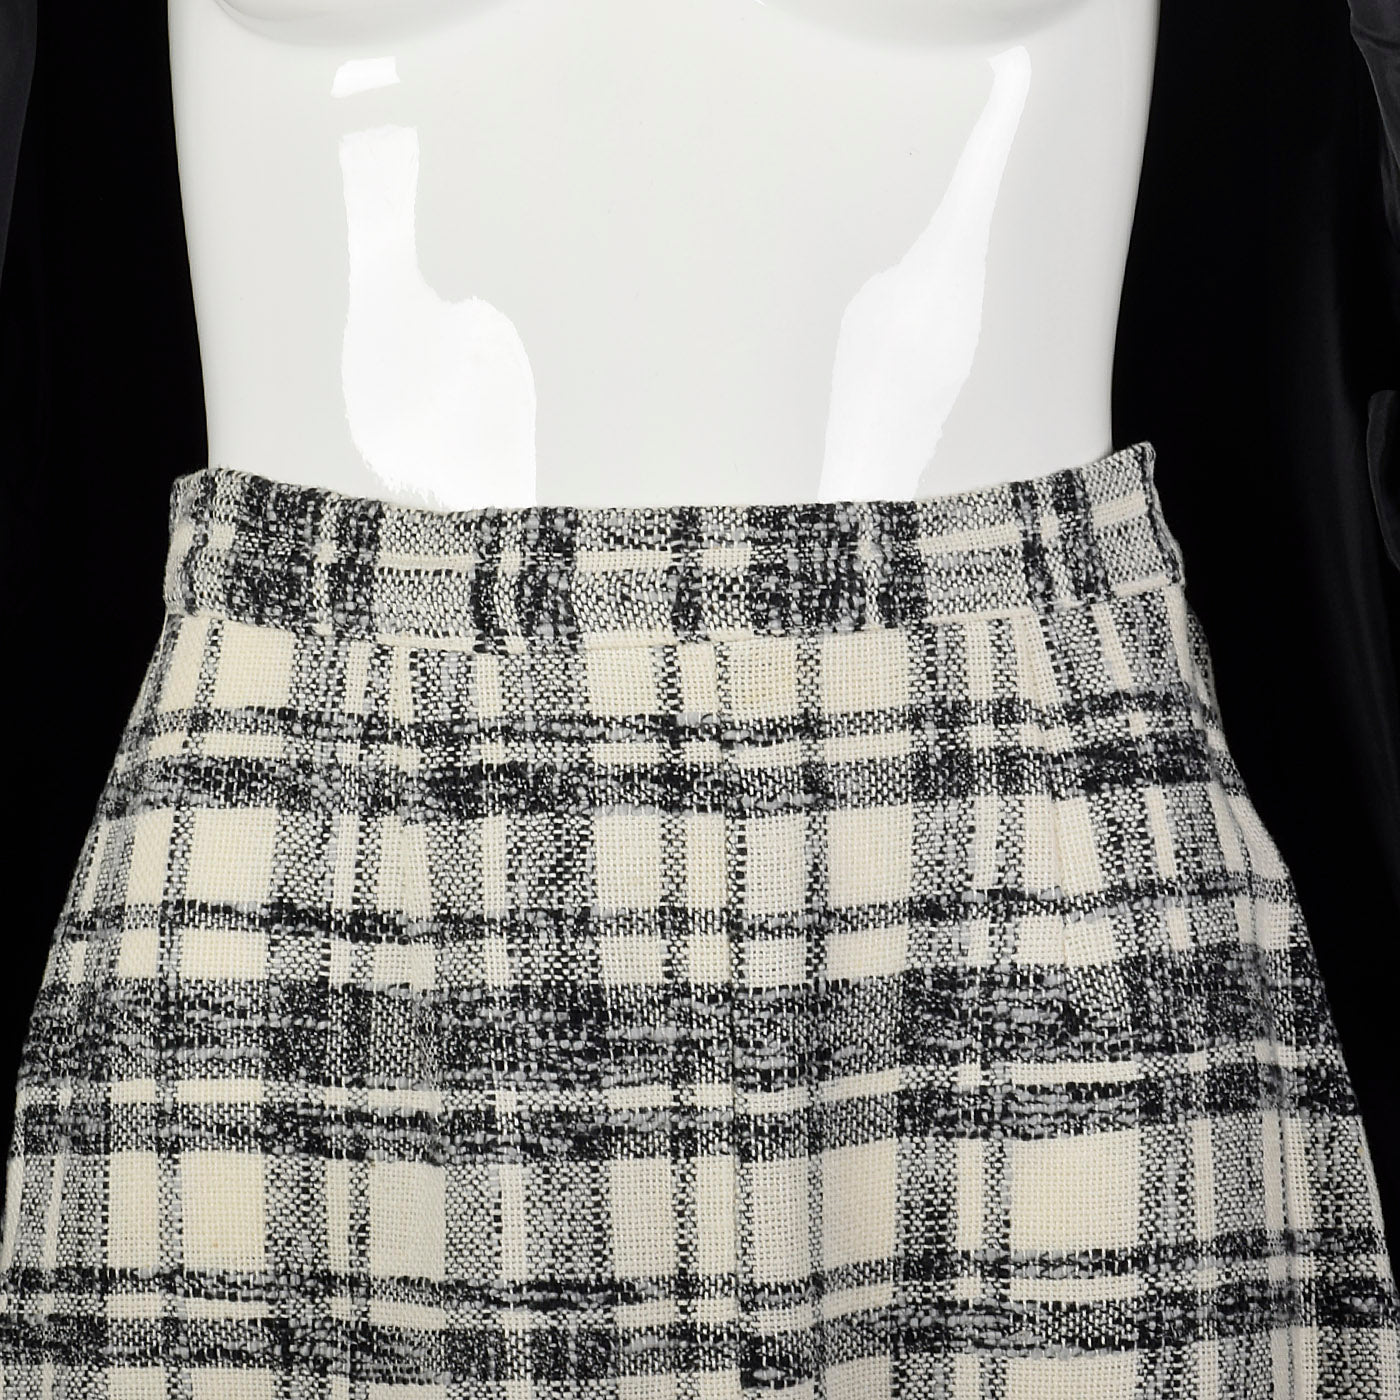 1960s Plaid Clutch Coat with Matching Skirt